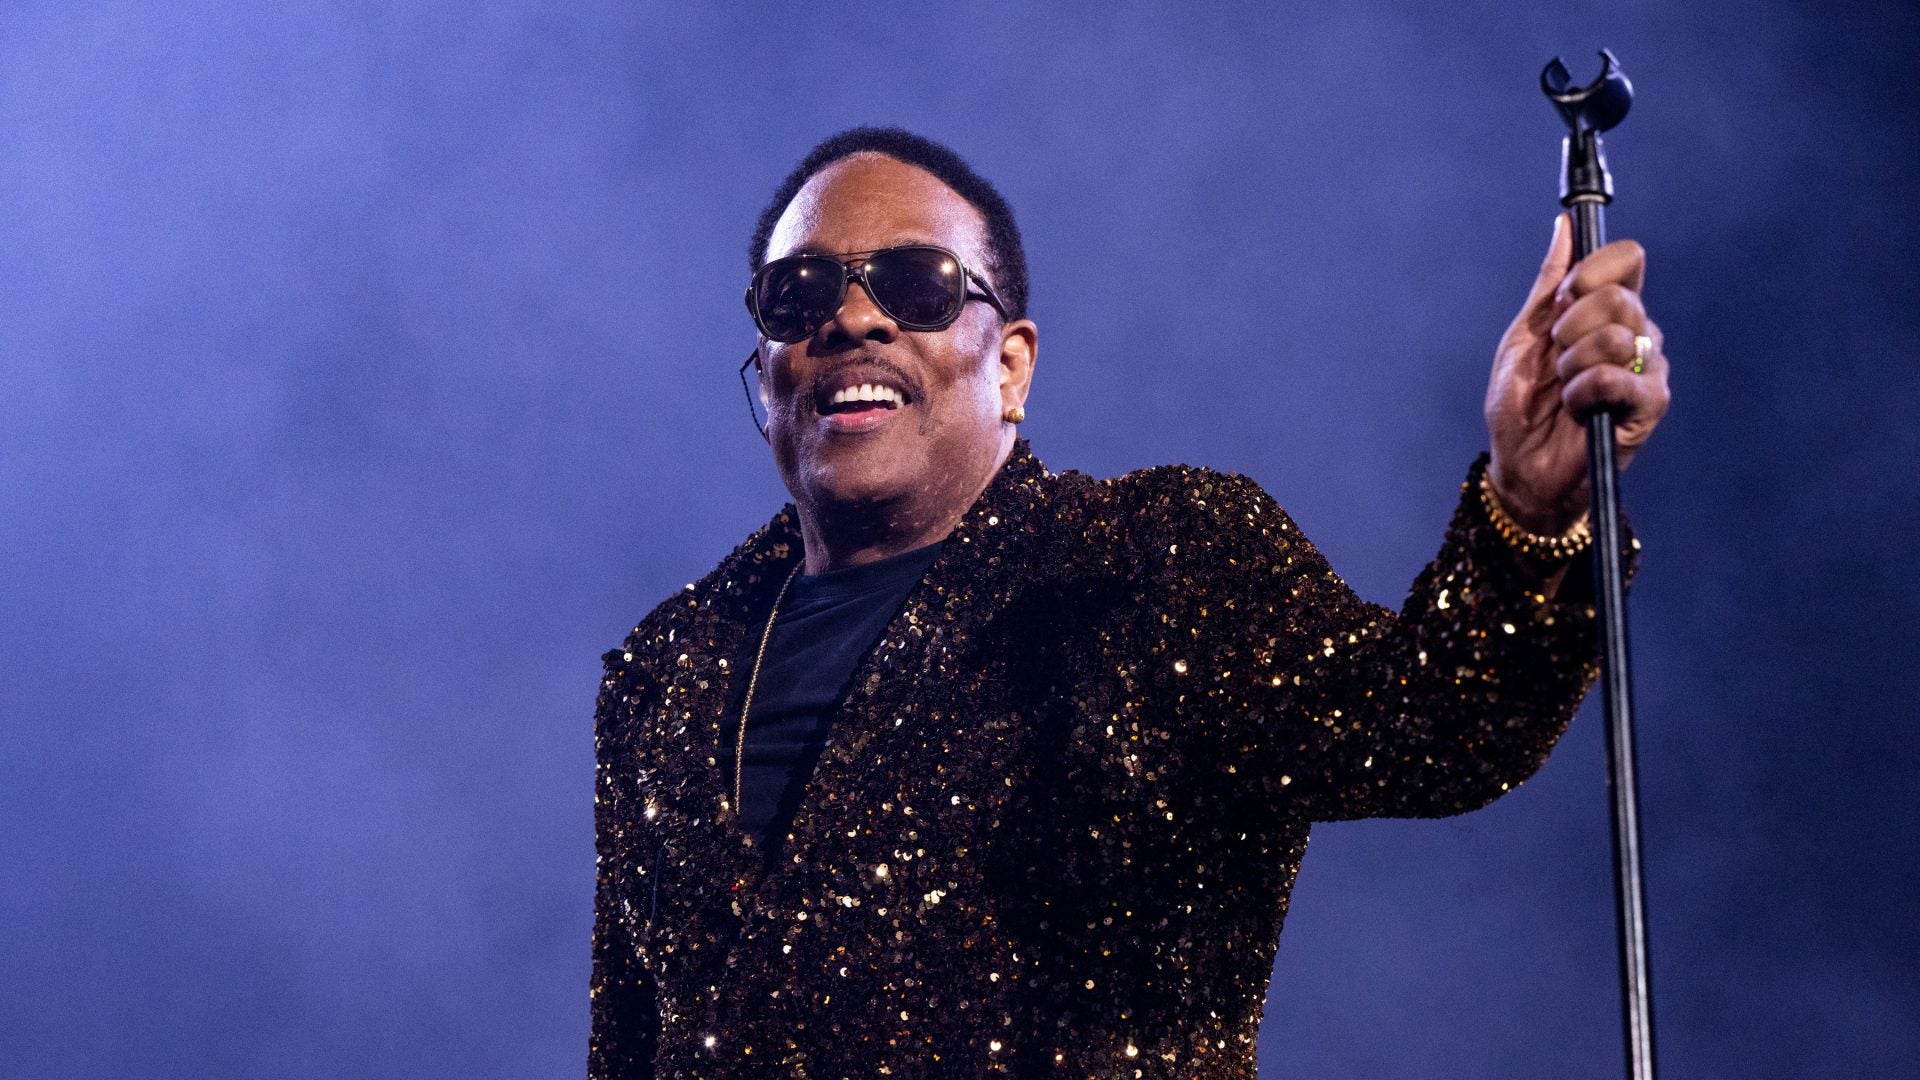 Our Favorite, Uncle Charlie Wilson, Speaks On His Return For The 30th Anniversary ESSENCE Festival Of Culture